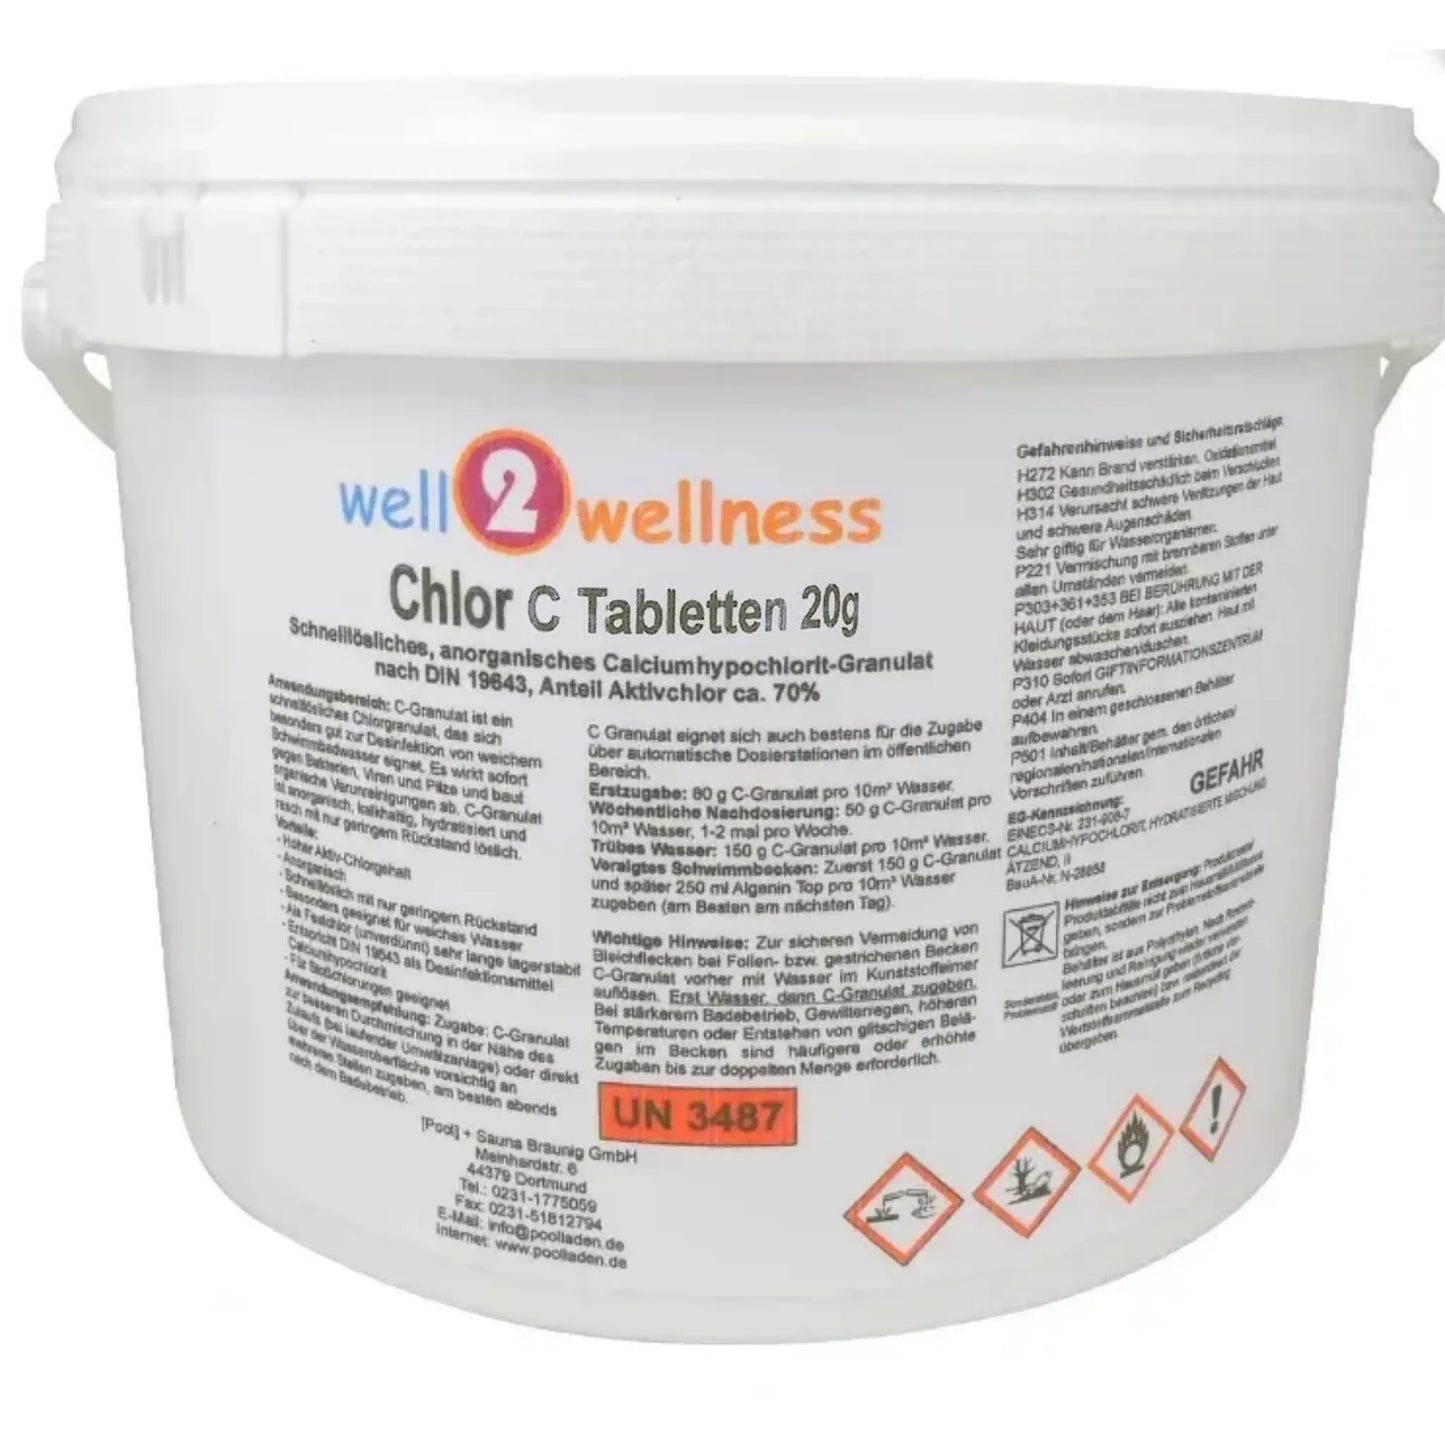 well2wellness® Chlor C Tabs 20g - Calciumhypochlorit